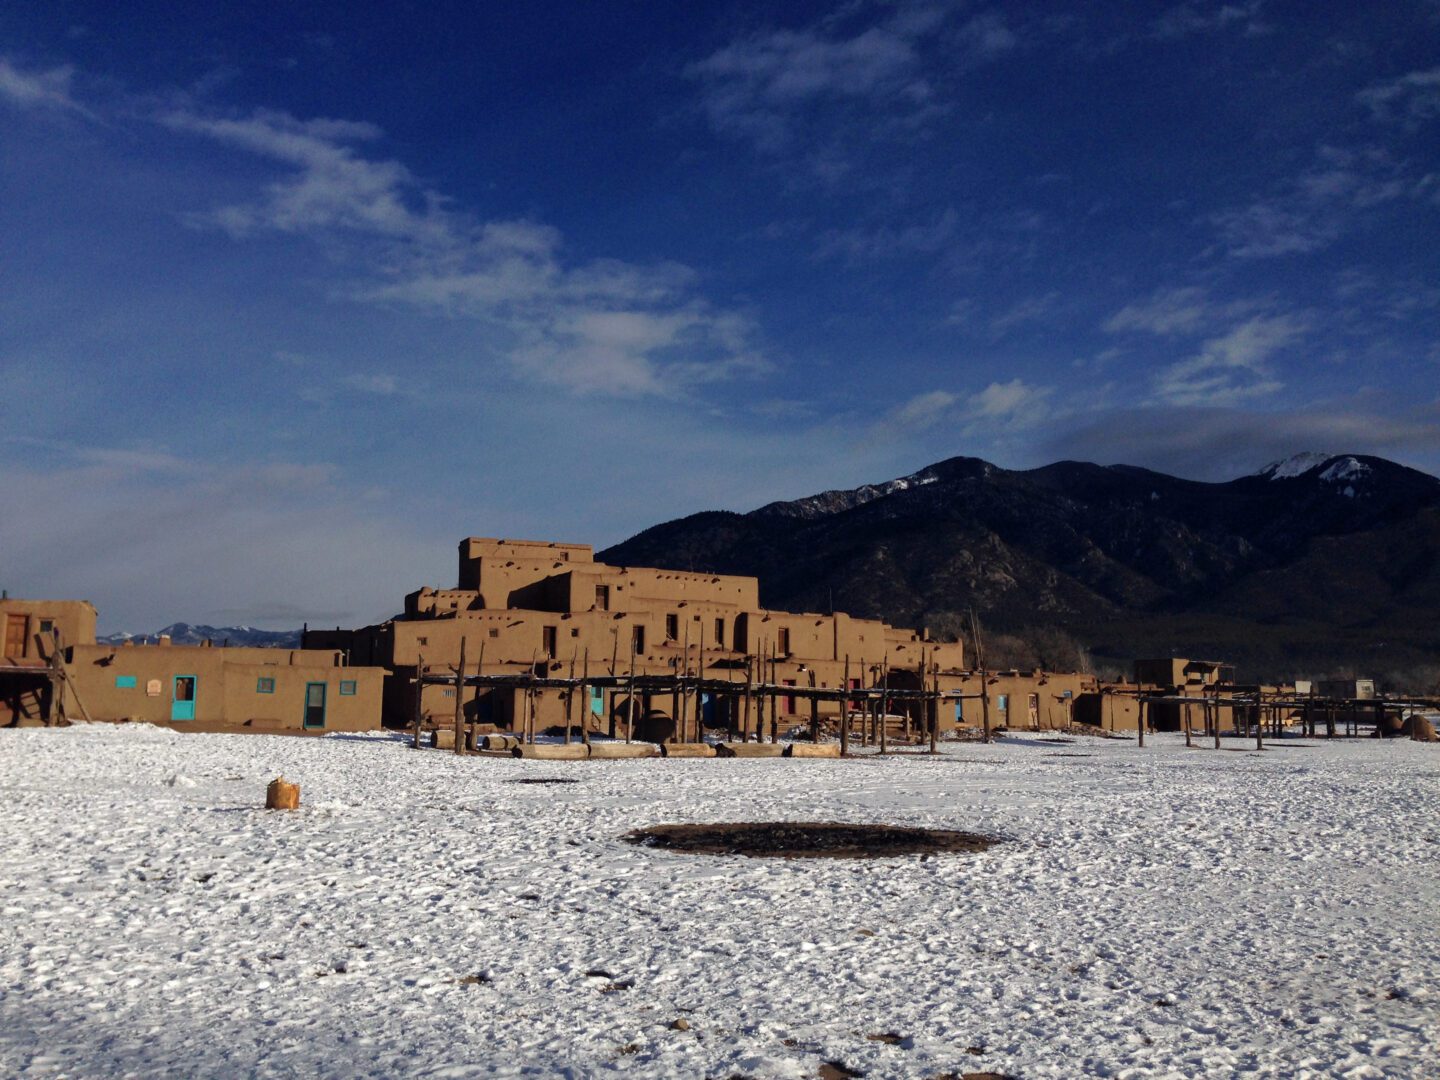 An adobe building in the snow with mountains in the background.